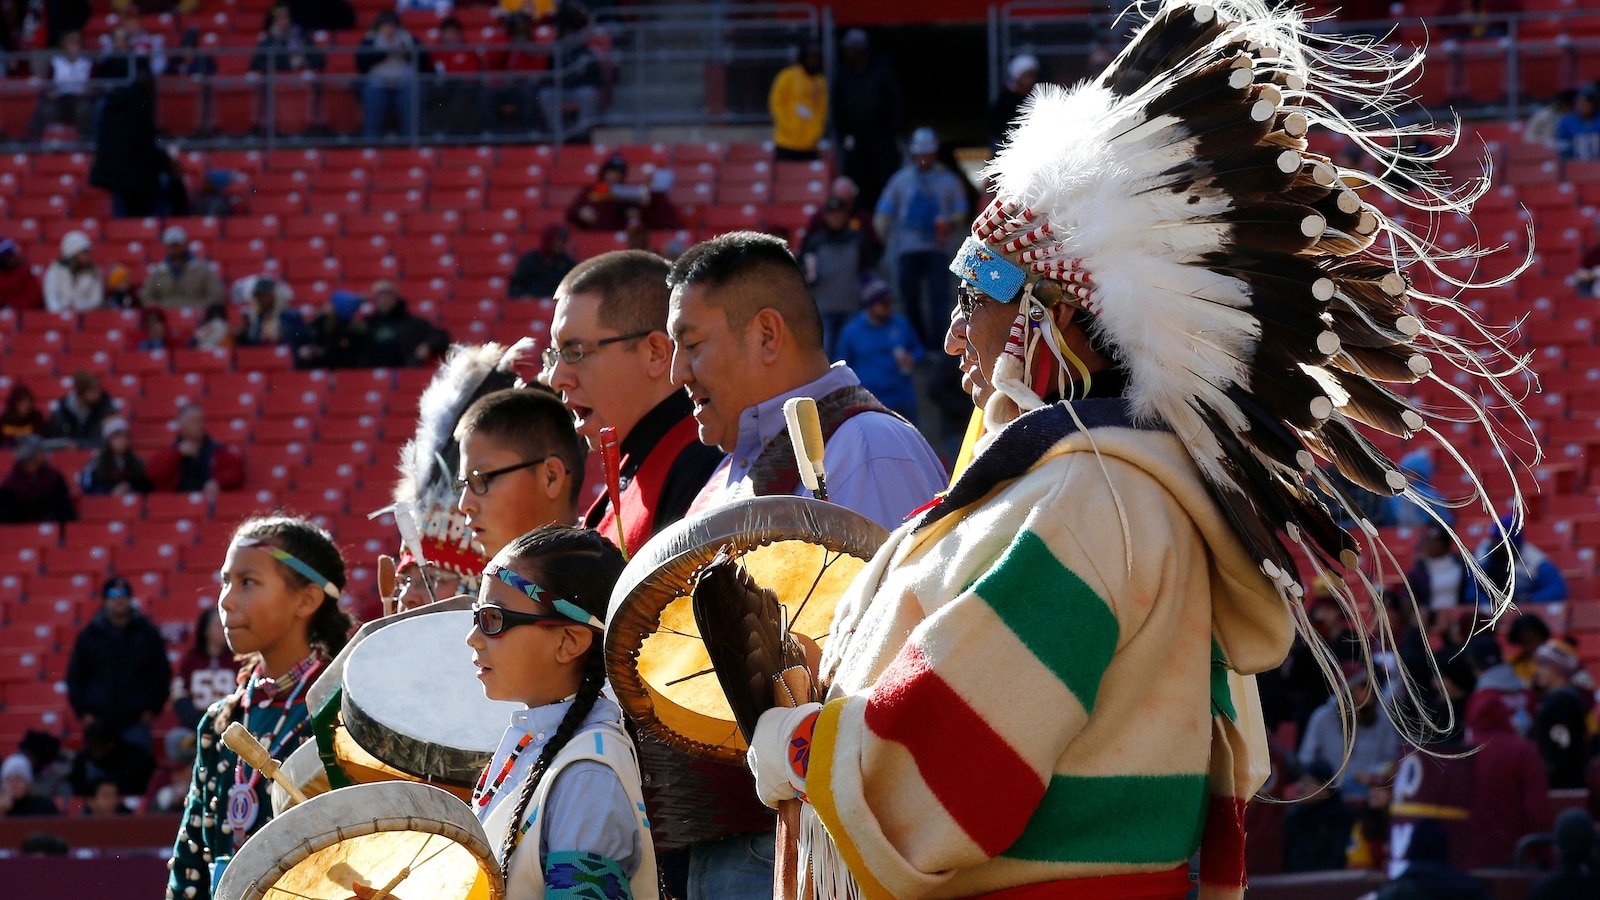 Senator proposes that Washington Commanders pay tribute to controversial old logo that is offensive to many Indigenous people